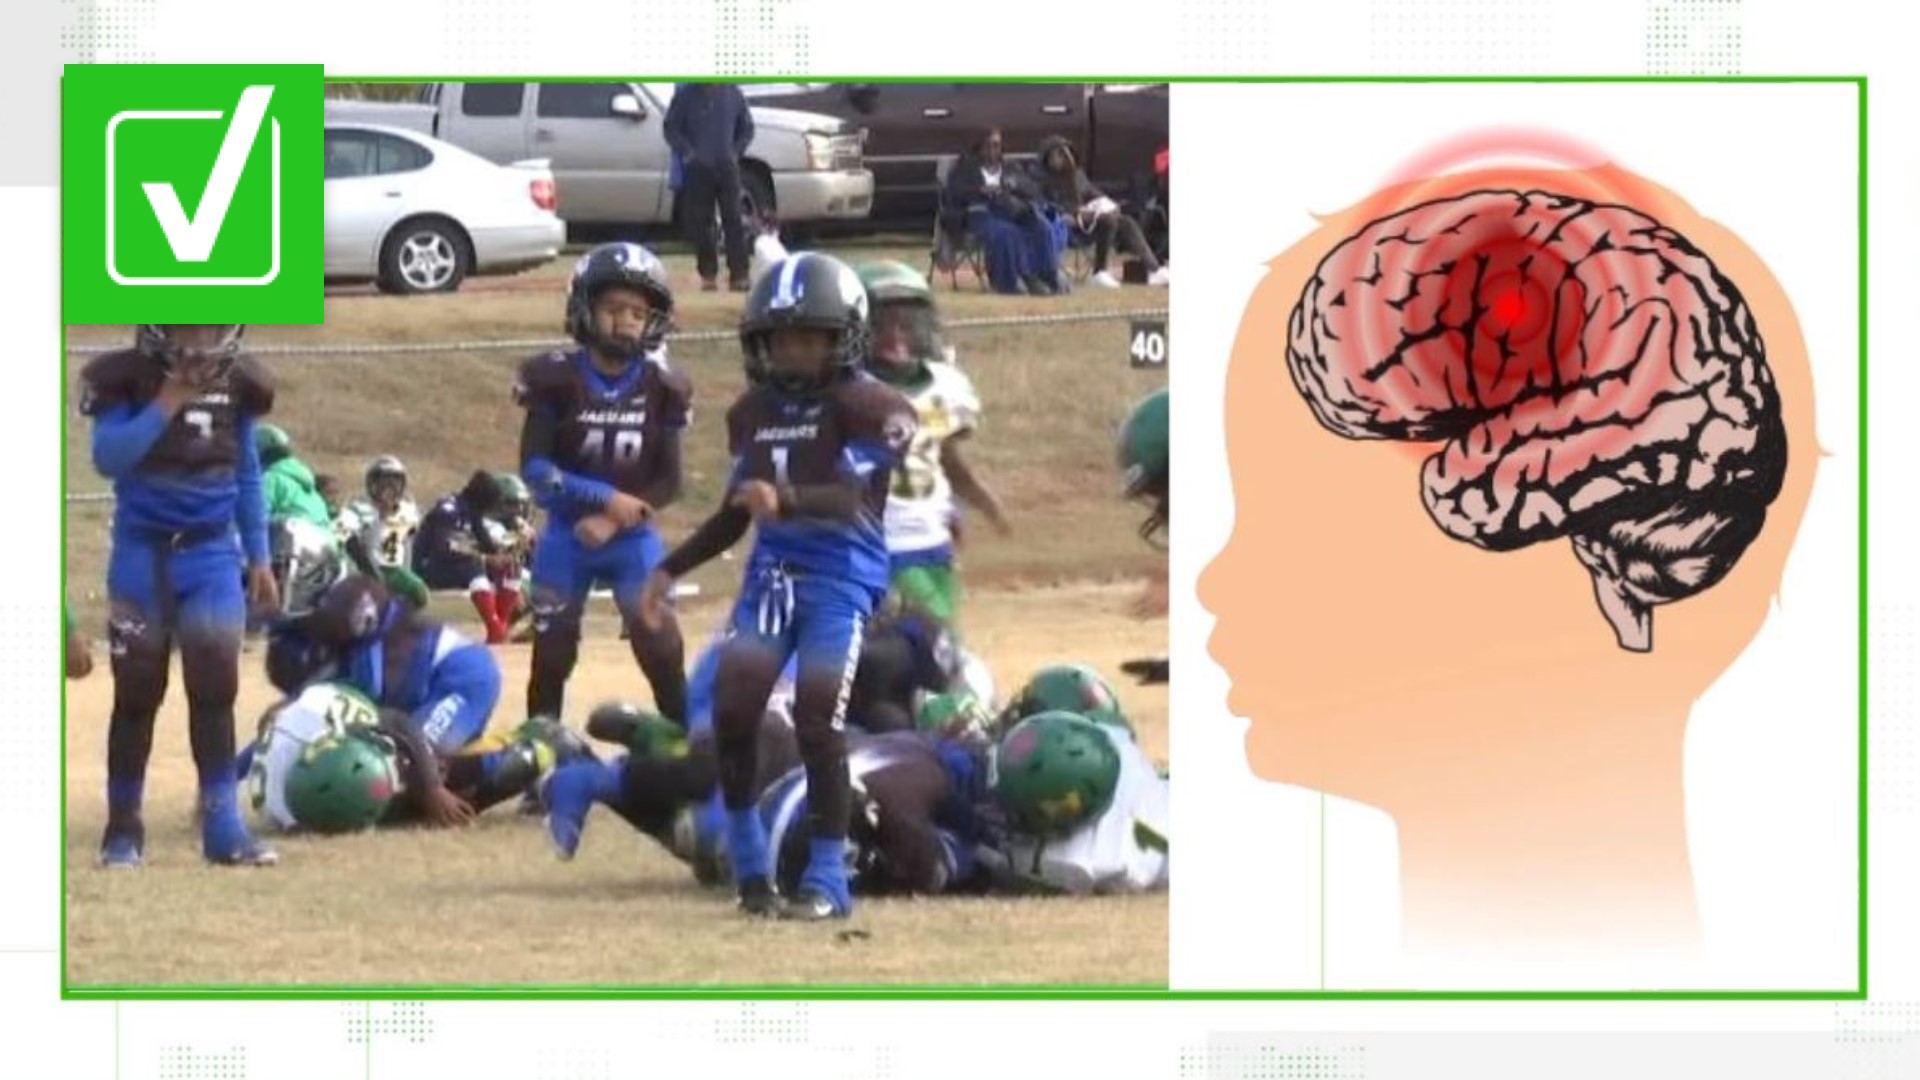 CTE Cases in Soccer Players Raise Questions About Safety of Heading the Ball